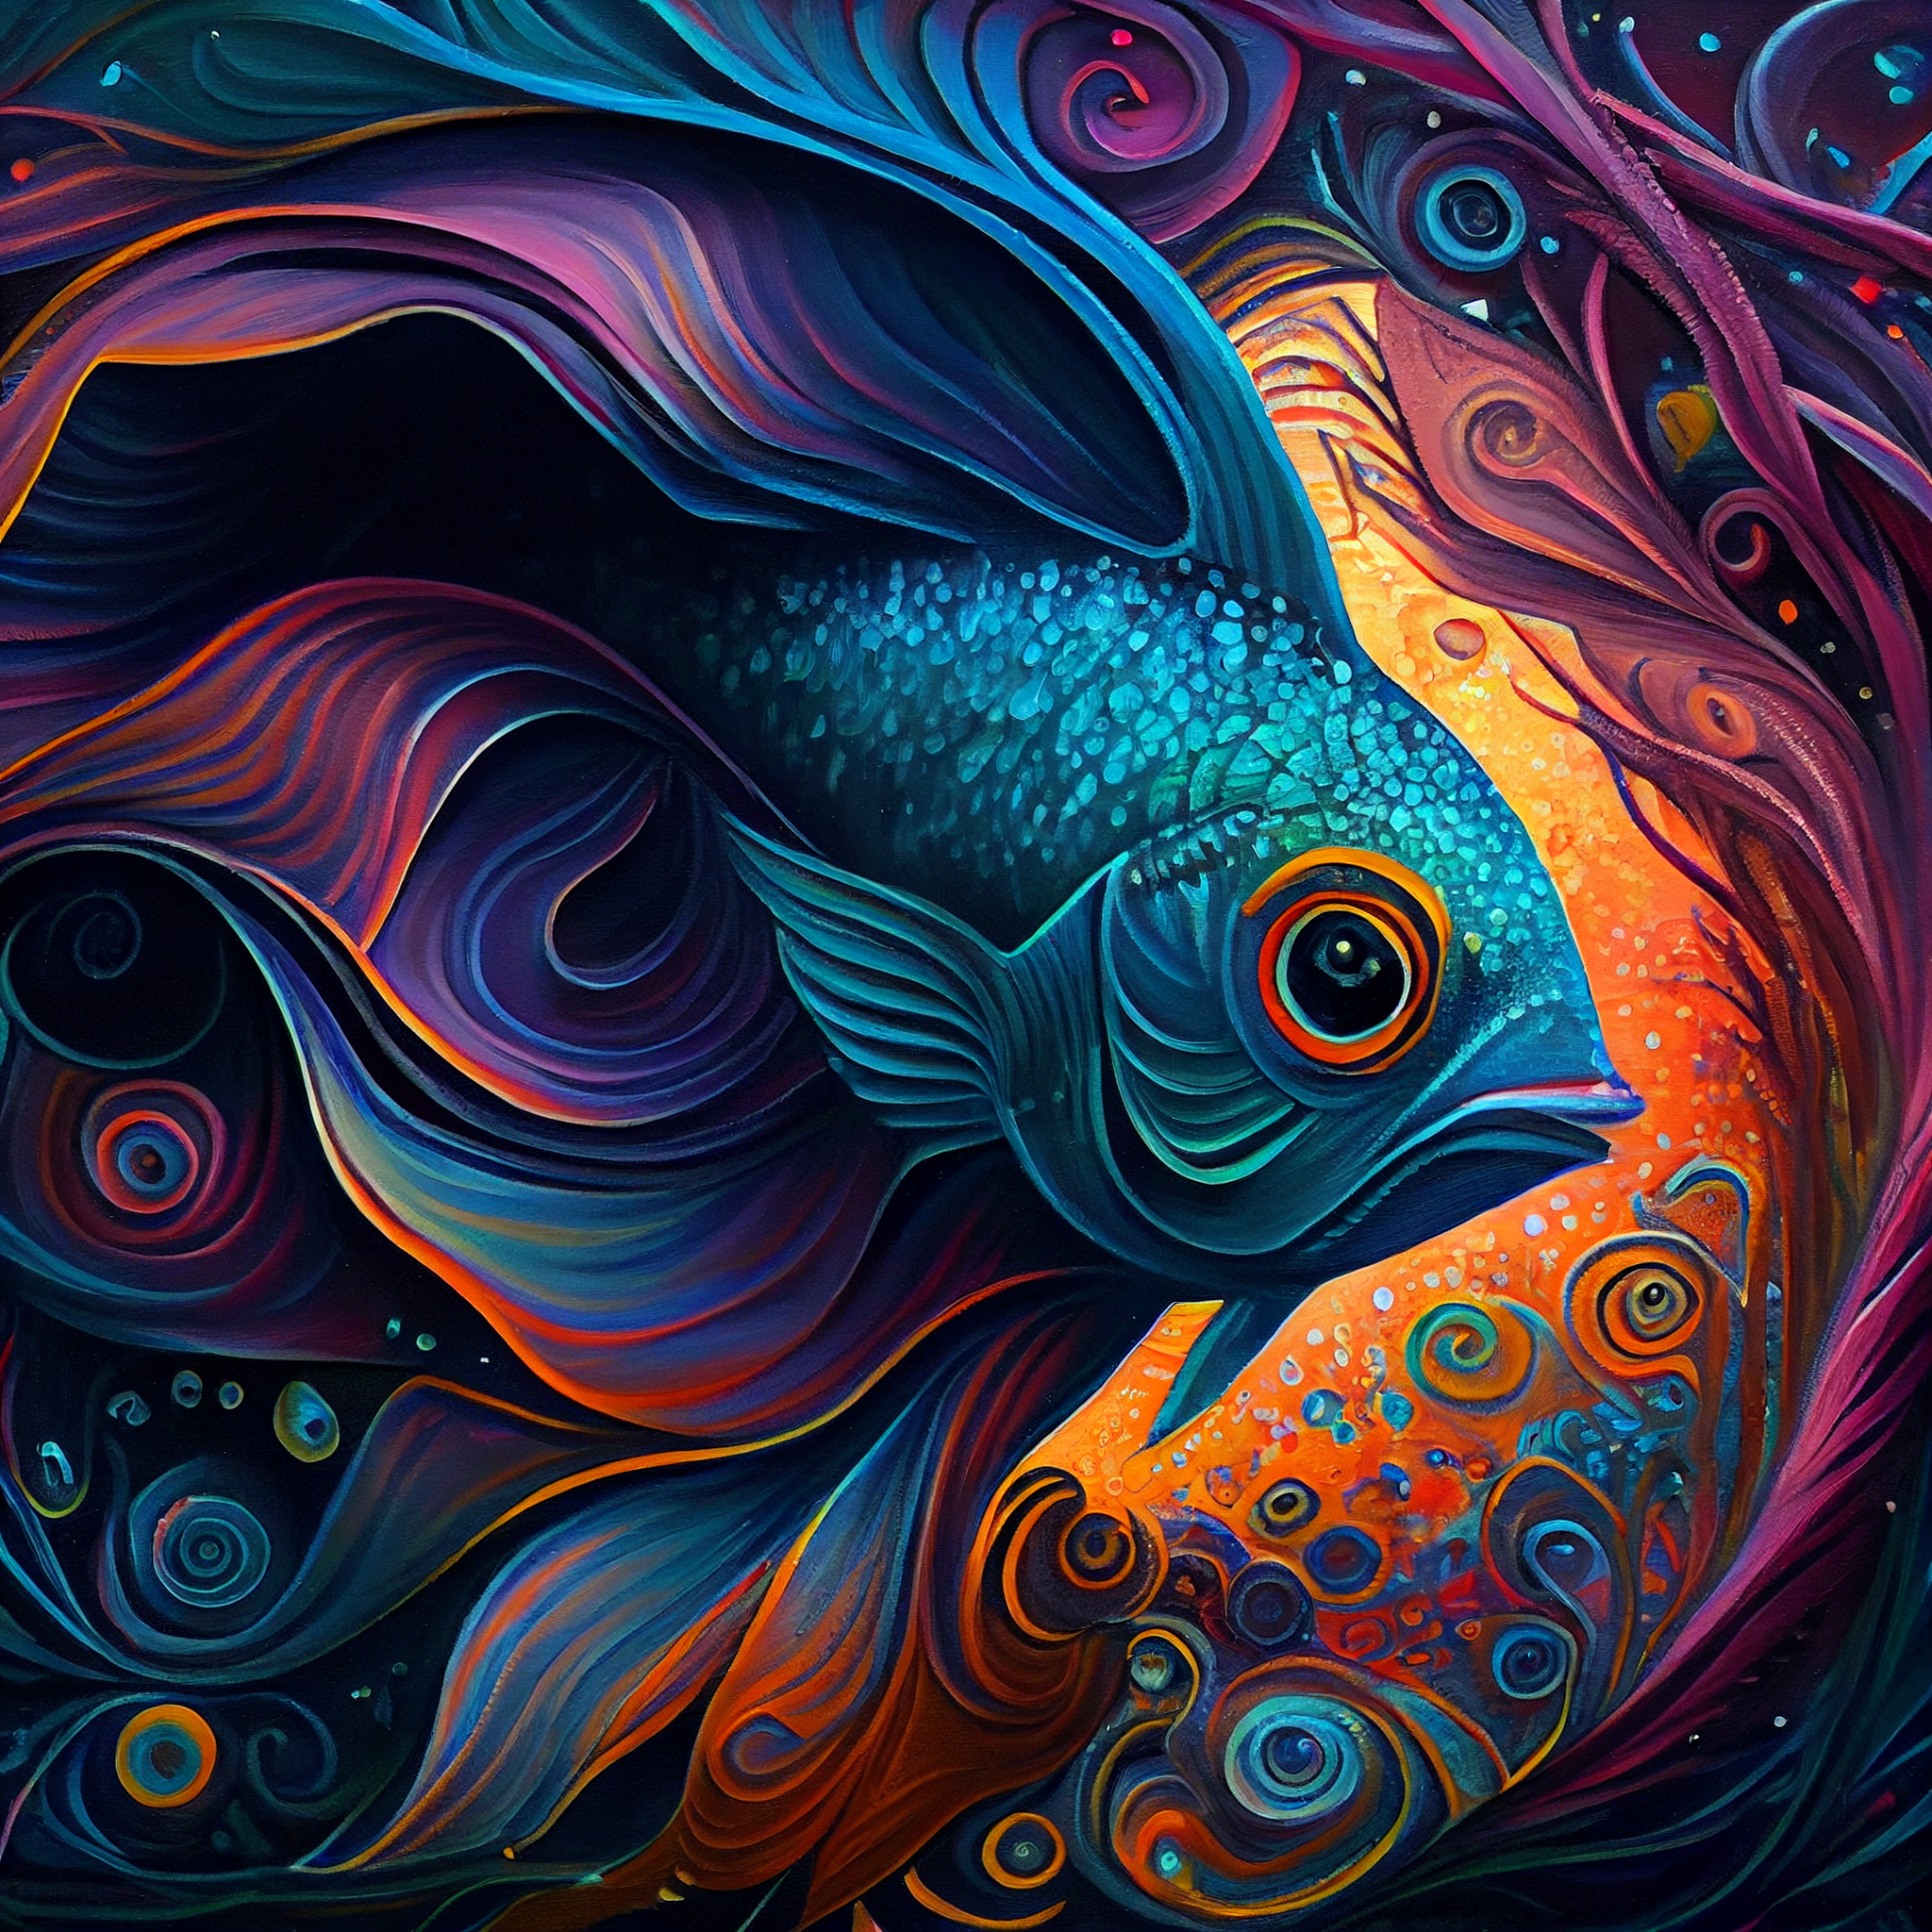 Extraterrestrial Underwater World: An Elaborate and Ultra-Detailed Acrylic Painting Print of Gradient Fish with Rich Colors and a Sense of Awe